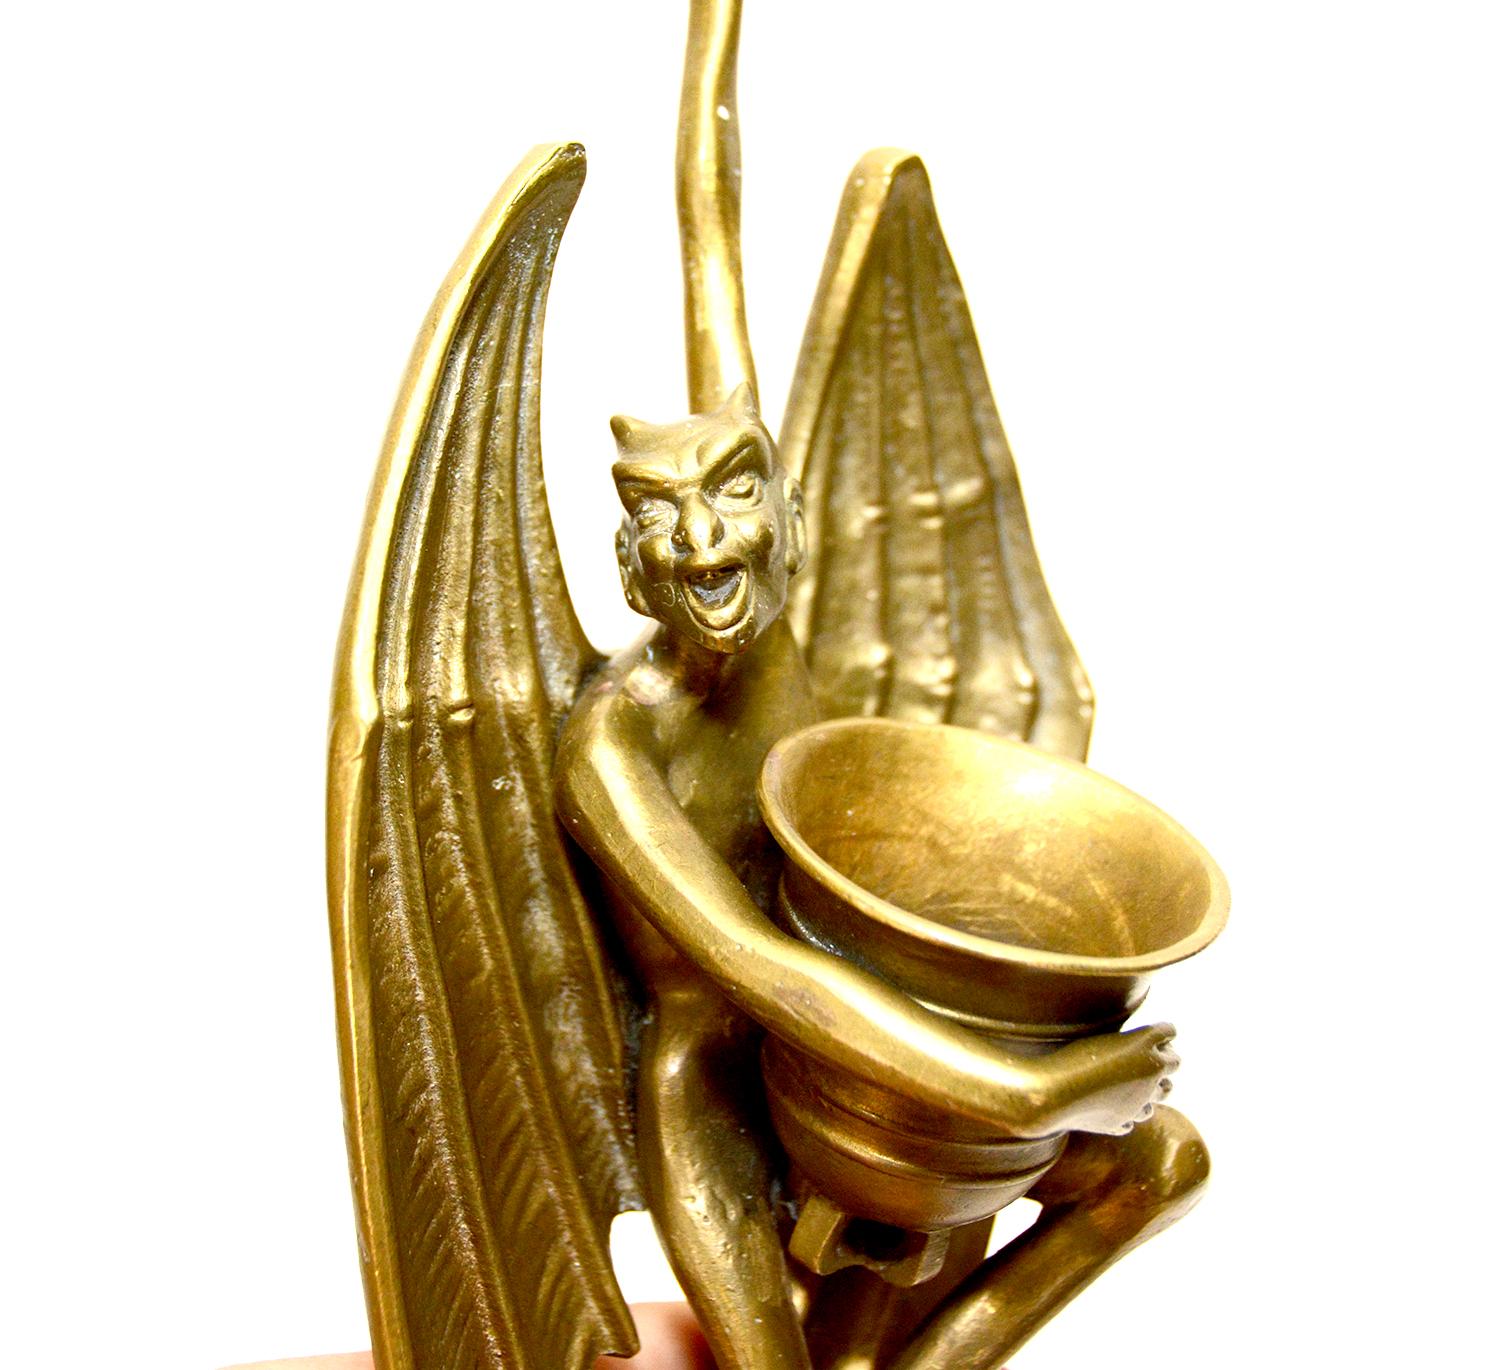 This is a rare whimsical Devil figure wall hanging match holder. The winged devil is holding a large vase in front of his chest. The vase can be used to store matches. His long stretched arm and hand hold a ring, which allow you to easily hang this